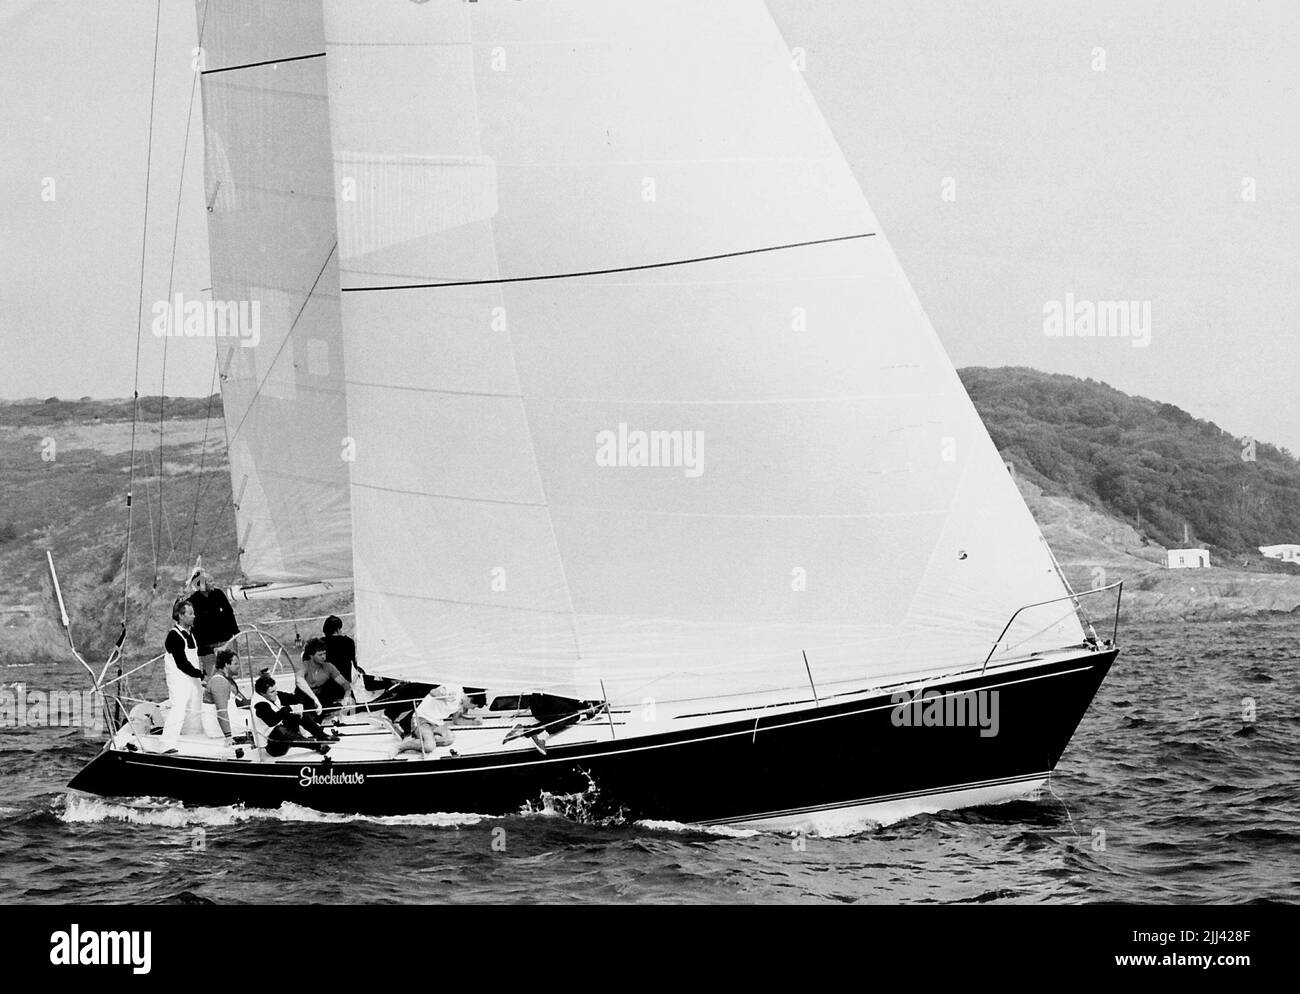 AJAXNETPHOTO. 10TH AUGUST, 1983. PLYMOUTH, ENGLAND. - ADMIRAL'S CUP - FASTNET - SHOCKWAVE, MEMBER OF NEW ZEALAND YACHTING TEAM, APPROACHES FINISH LINE OF 605 MILE RACE. PHOTO:JONATHAN EASTLAND/AJAX REF:340 222904 45 Stock Photo